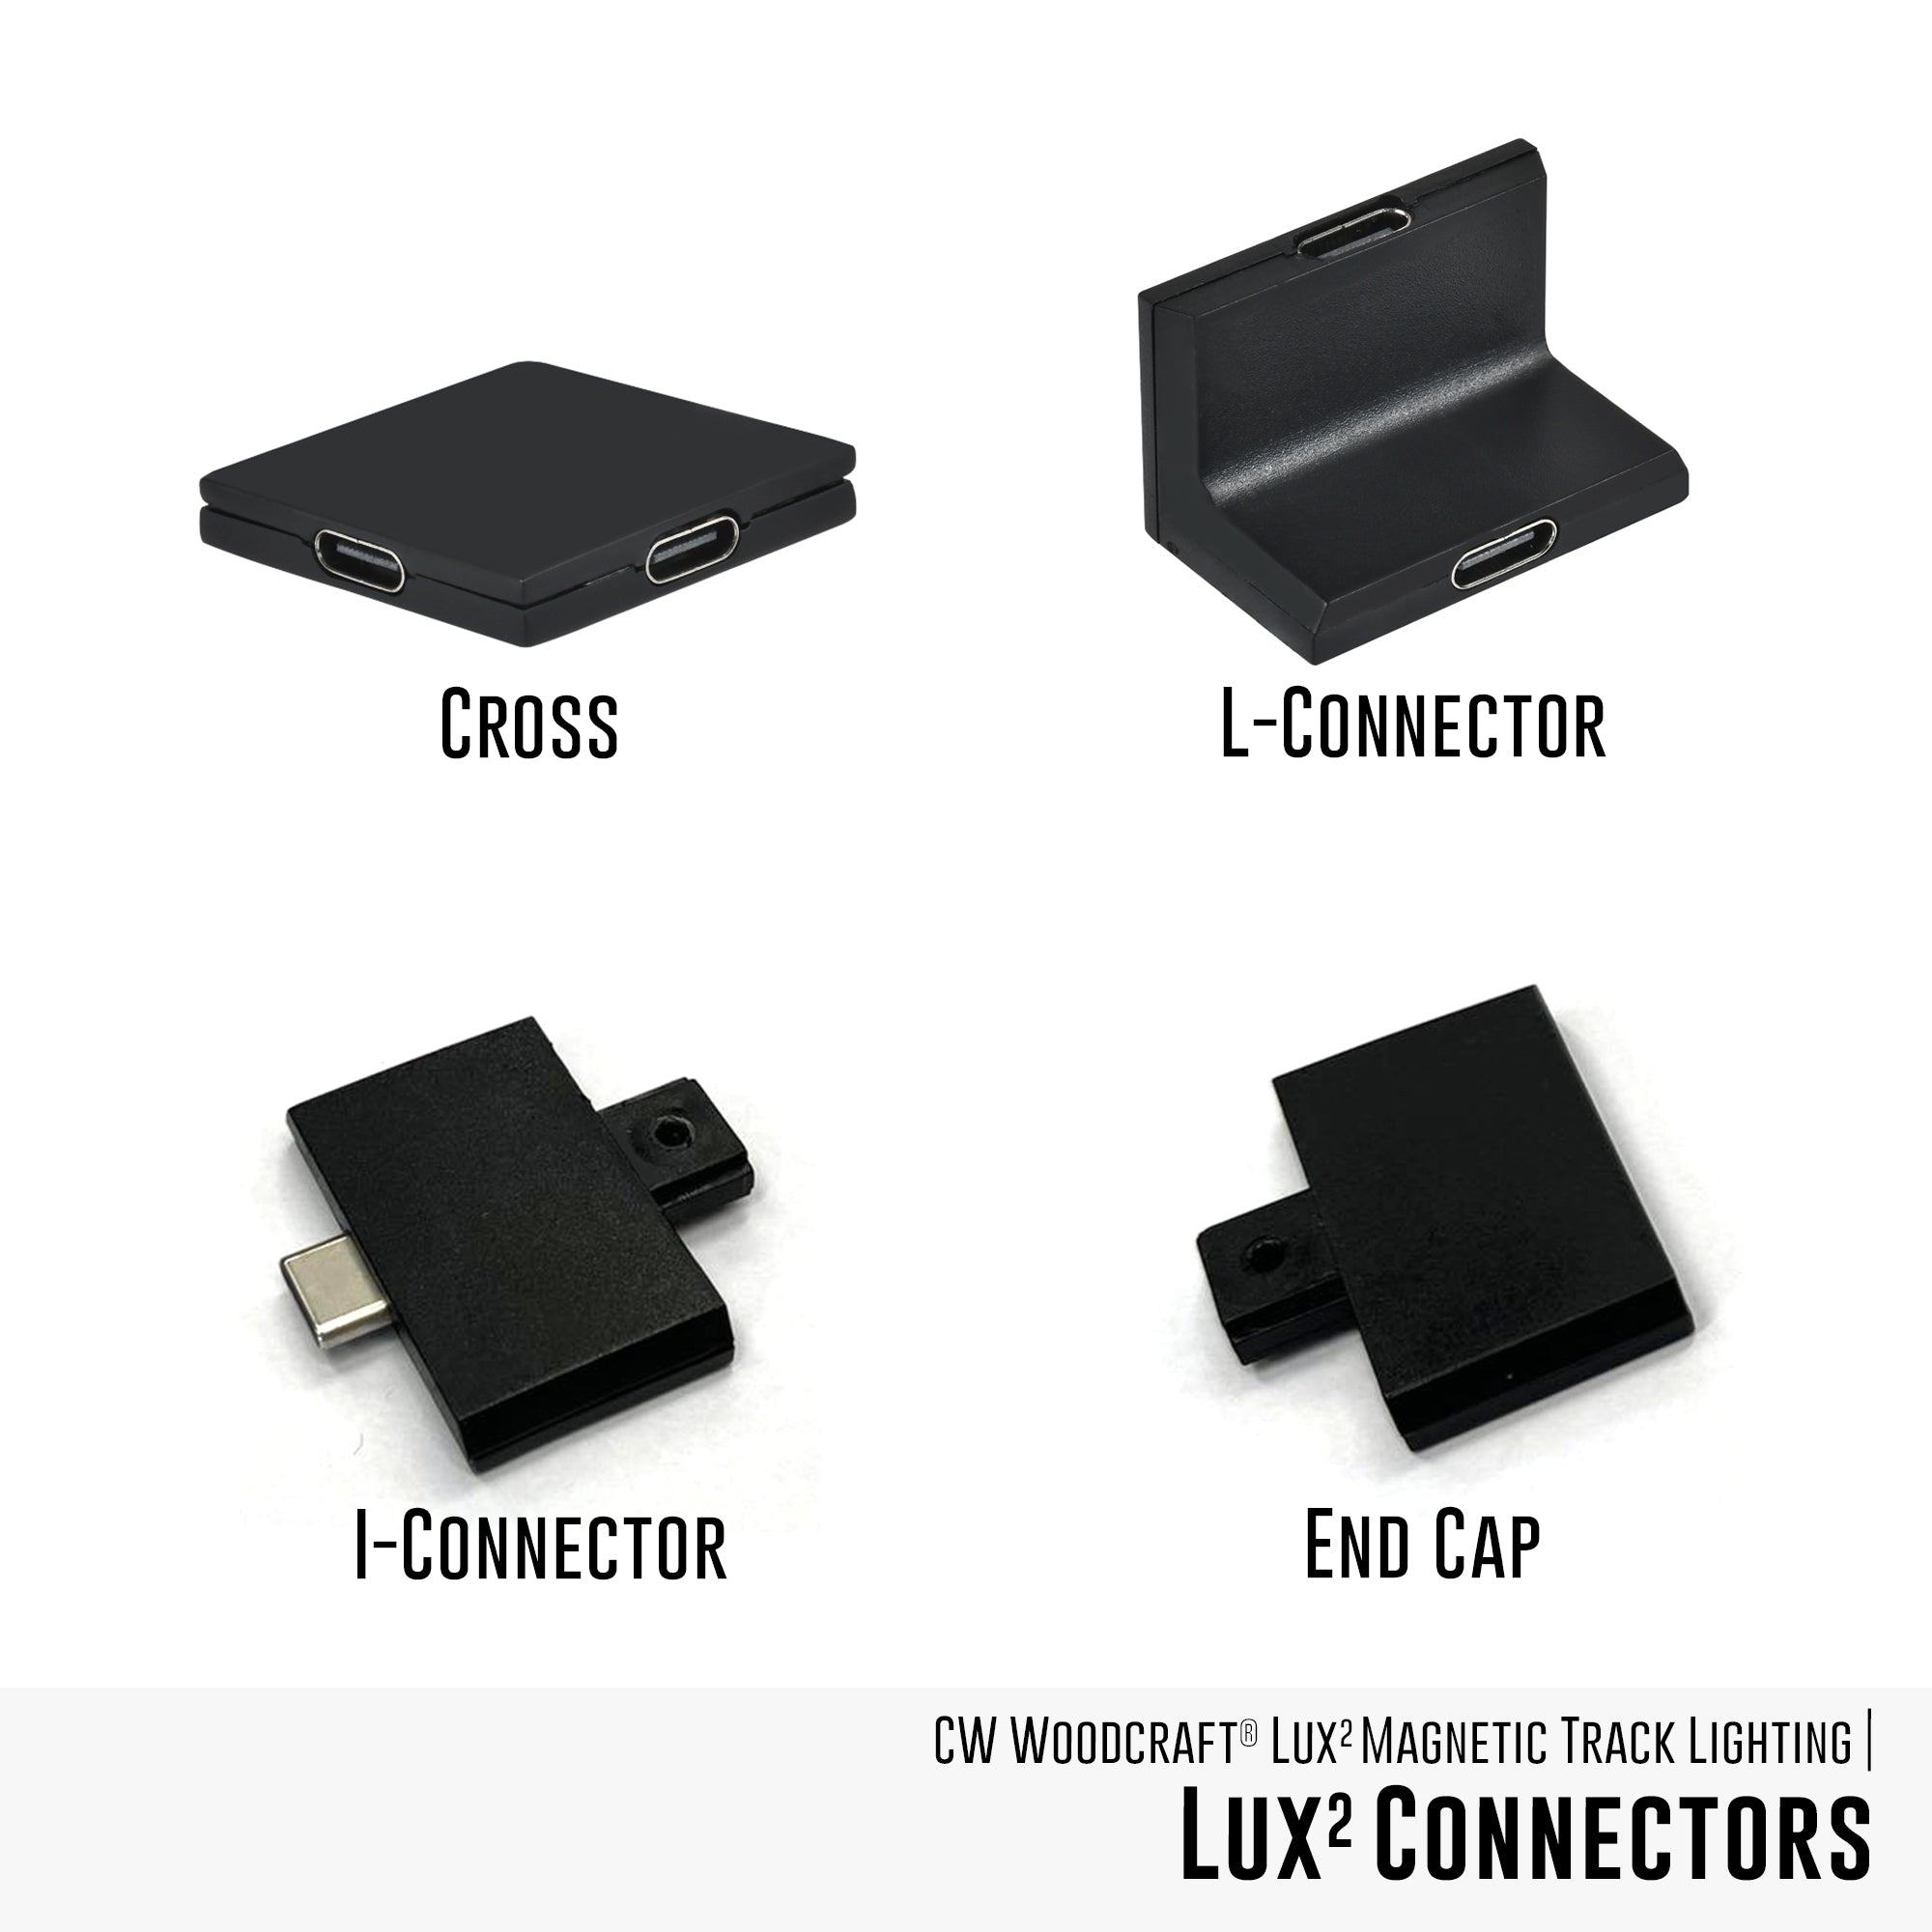 LUX 2 Magnetic Lighting System | Connectors